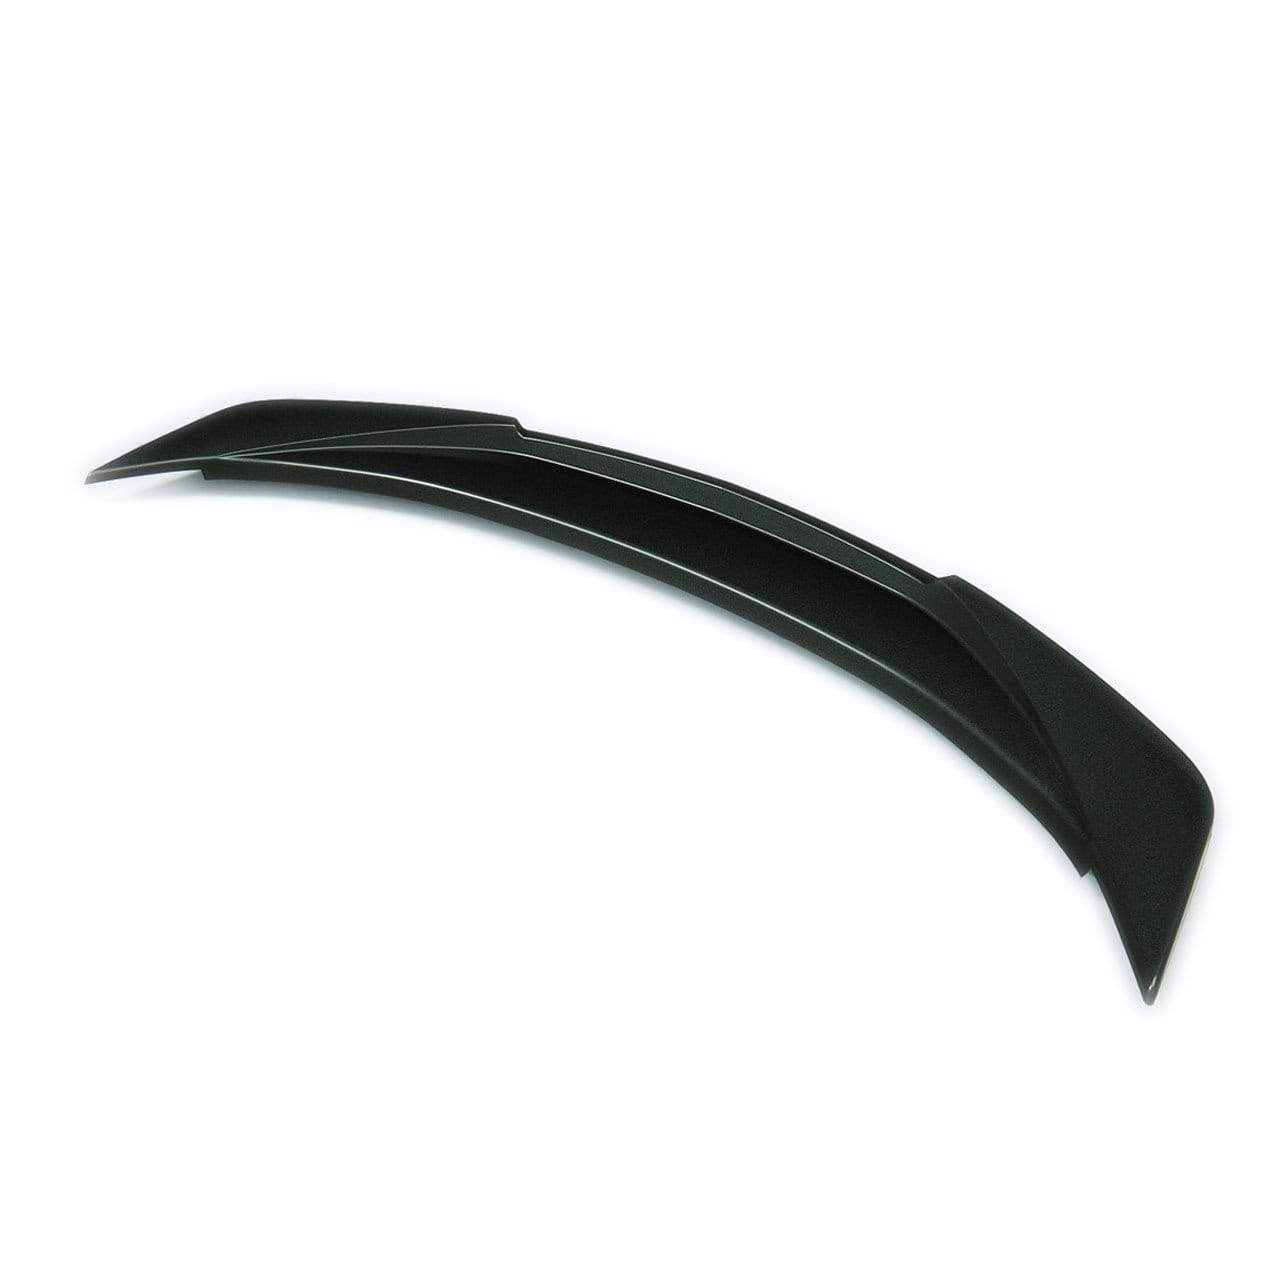 ACS Gen6 Camaro LS LT Rear Deck Spoiler in Gloss Black [48-4-015|48-4-103]PRM - Improved Downforce & Style by ACS Composite.